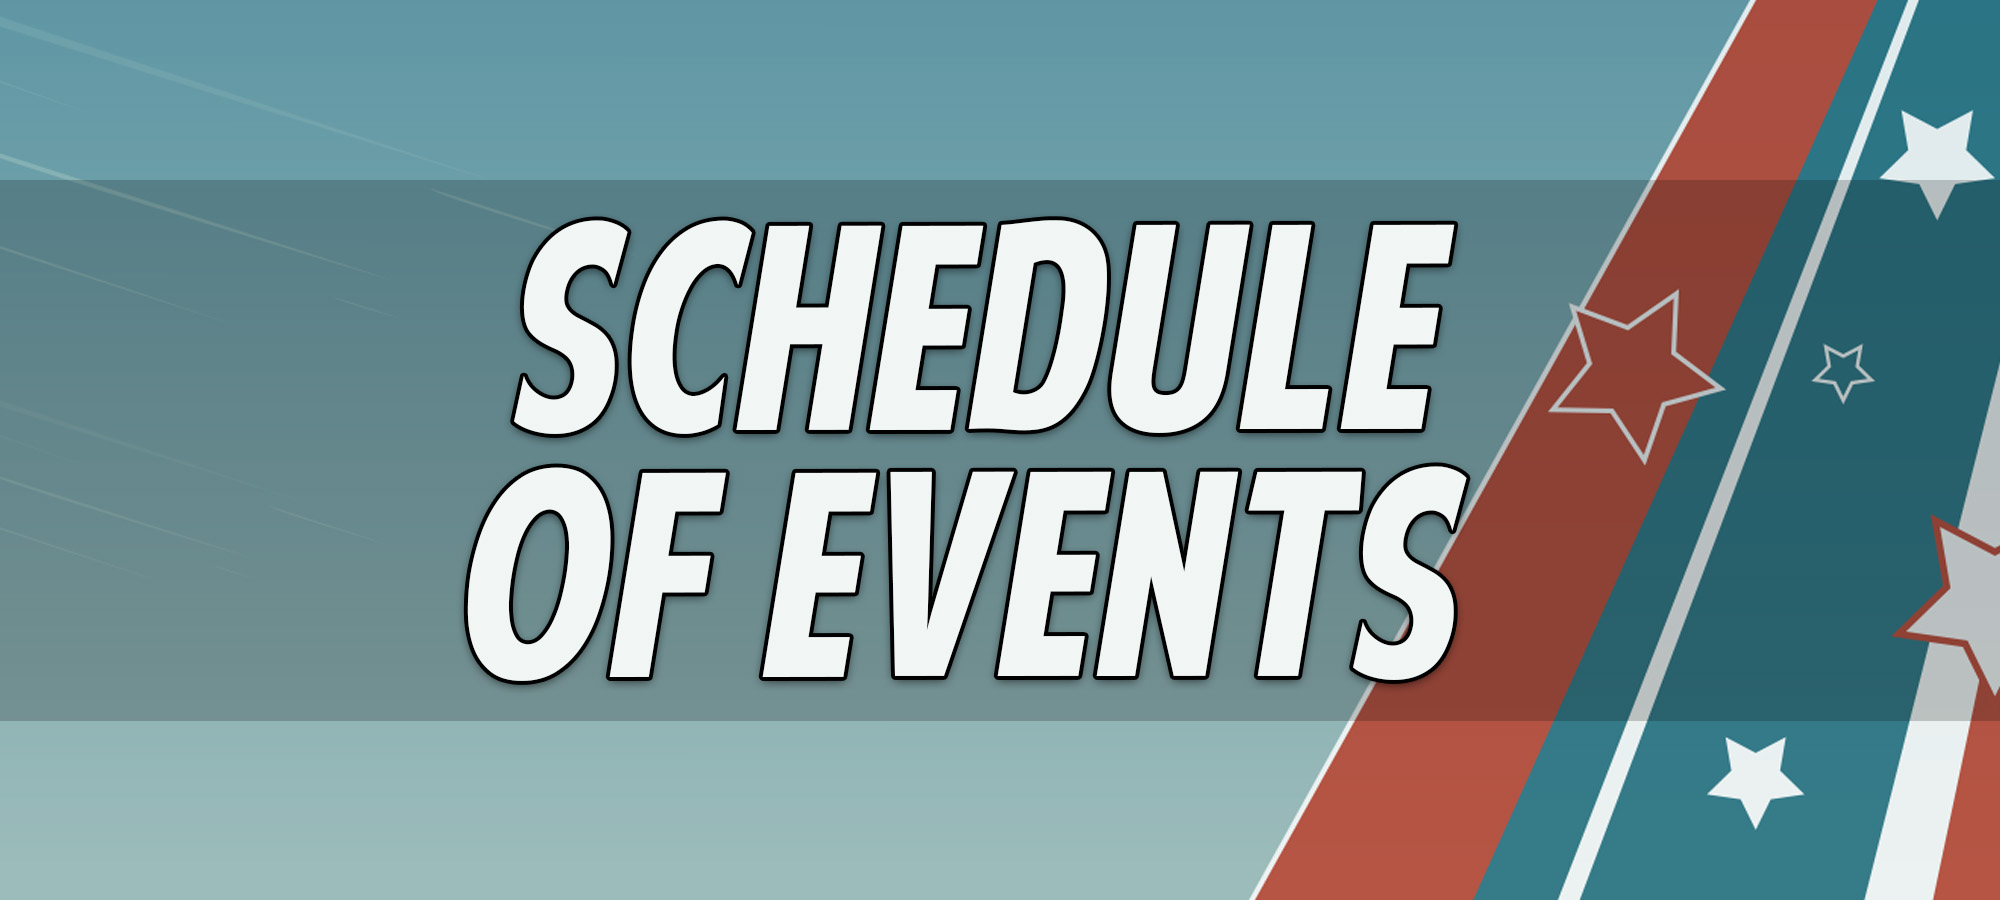 Indianapolis Schedule of Events